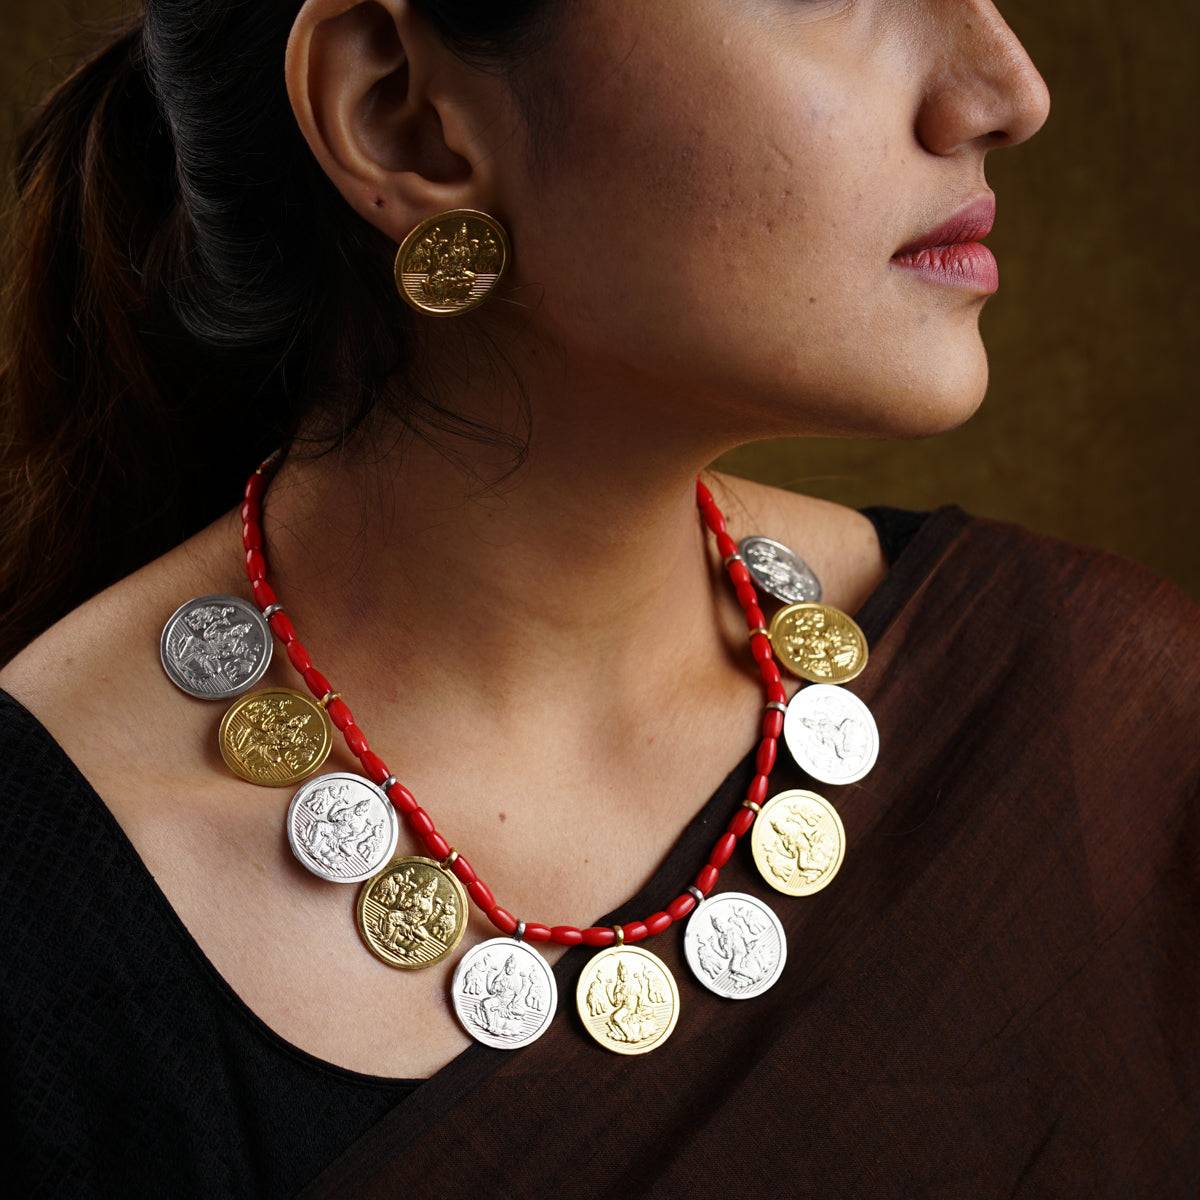 a woman wearing a necklace made of coins